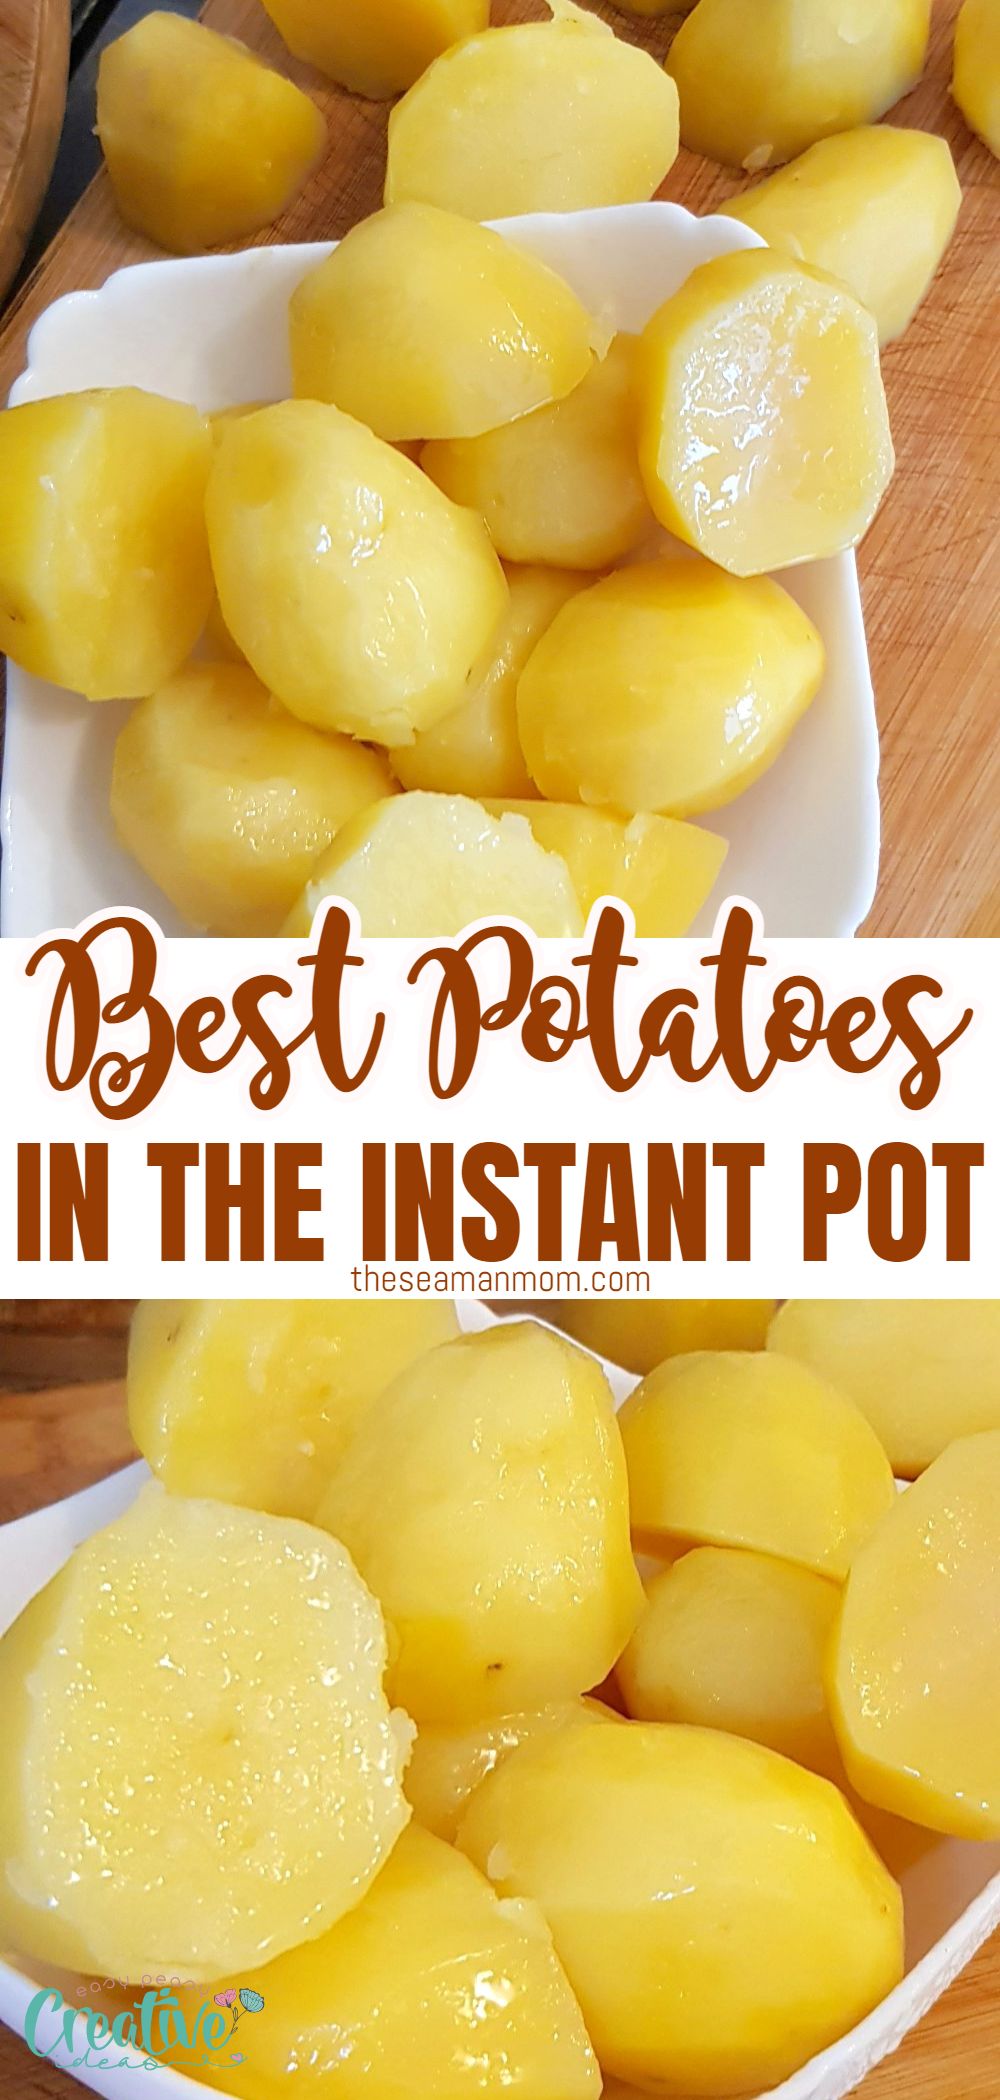 Learn how easy it is to cook perfect instant pot potatoes! This recipe will save you time but still give you that flavorful meal you've been craving! Perfect dish for the whole family and it takes less than 15 minutes! Great for using on weekend lunches or after a long day at work! via @petroneagu